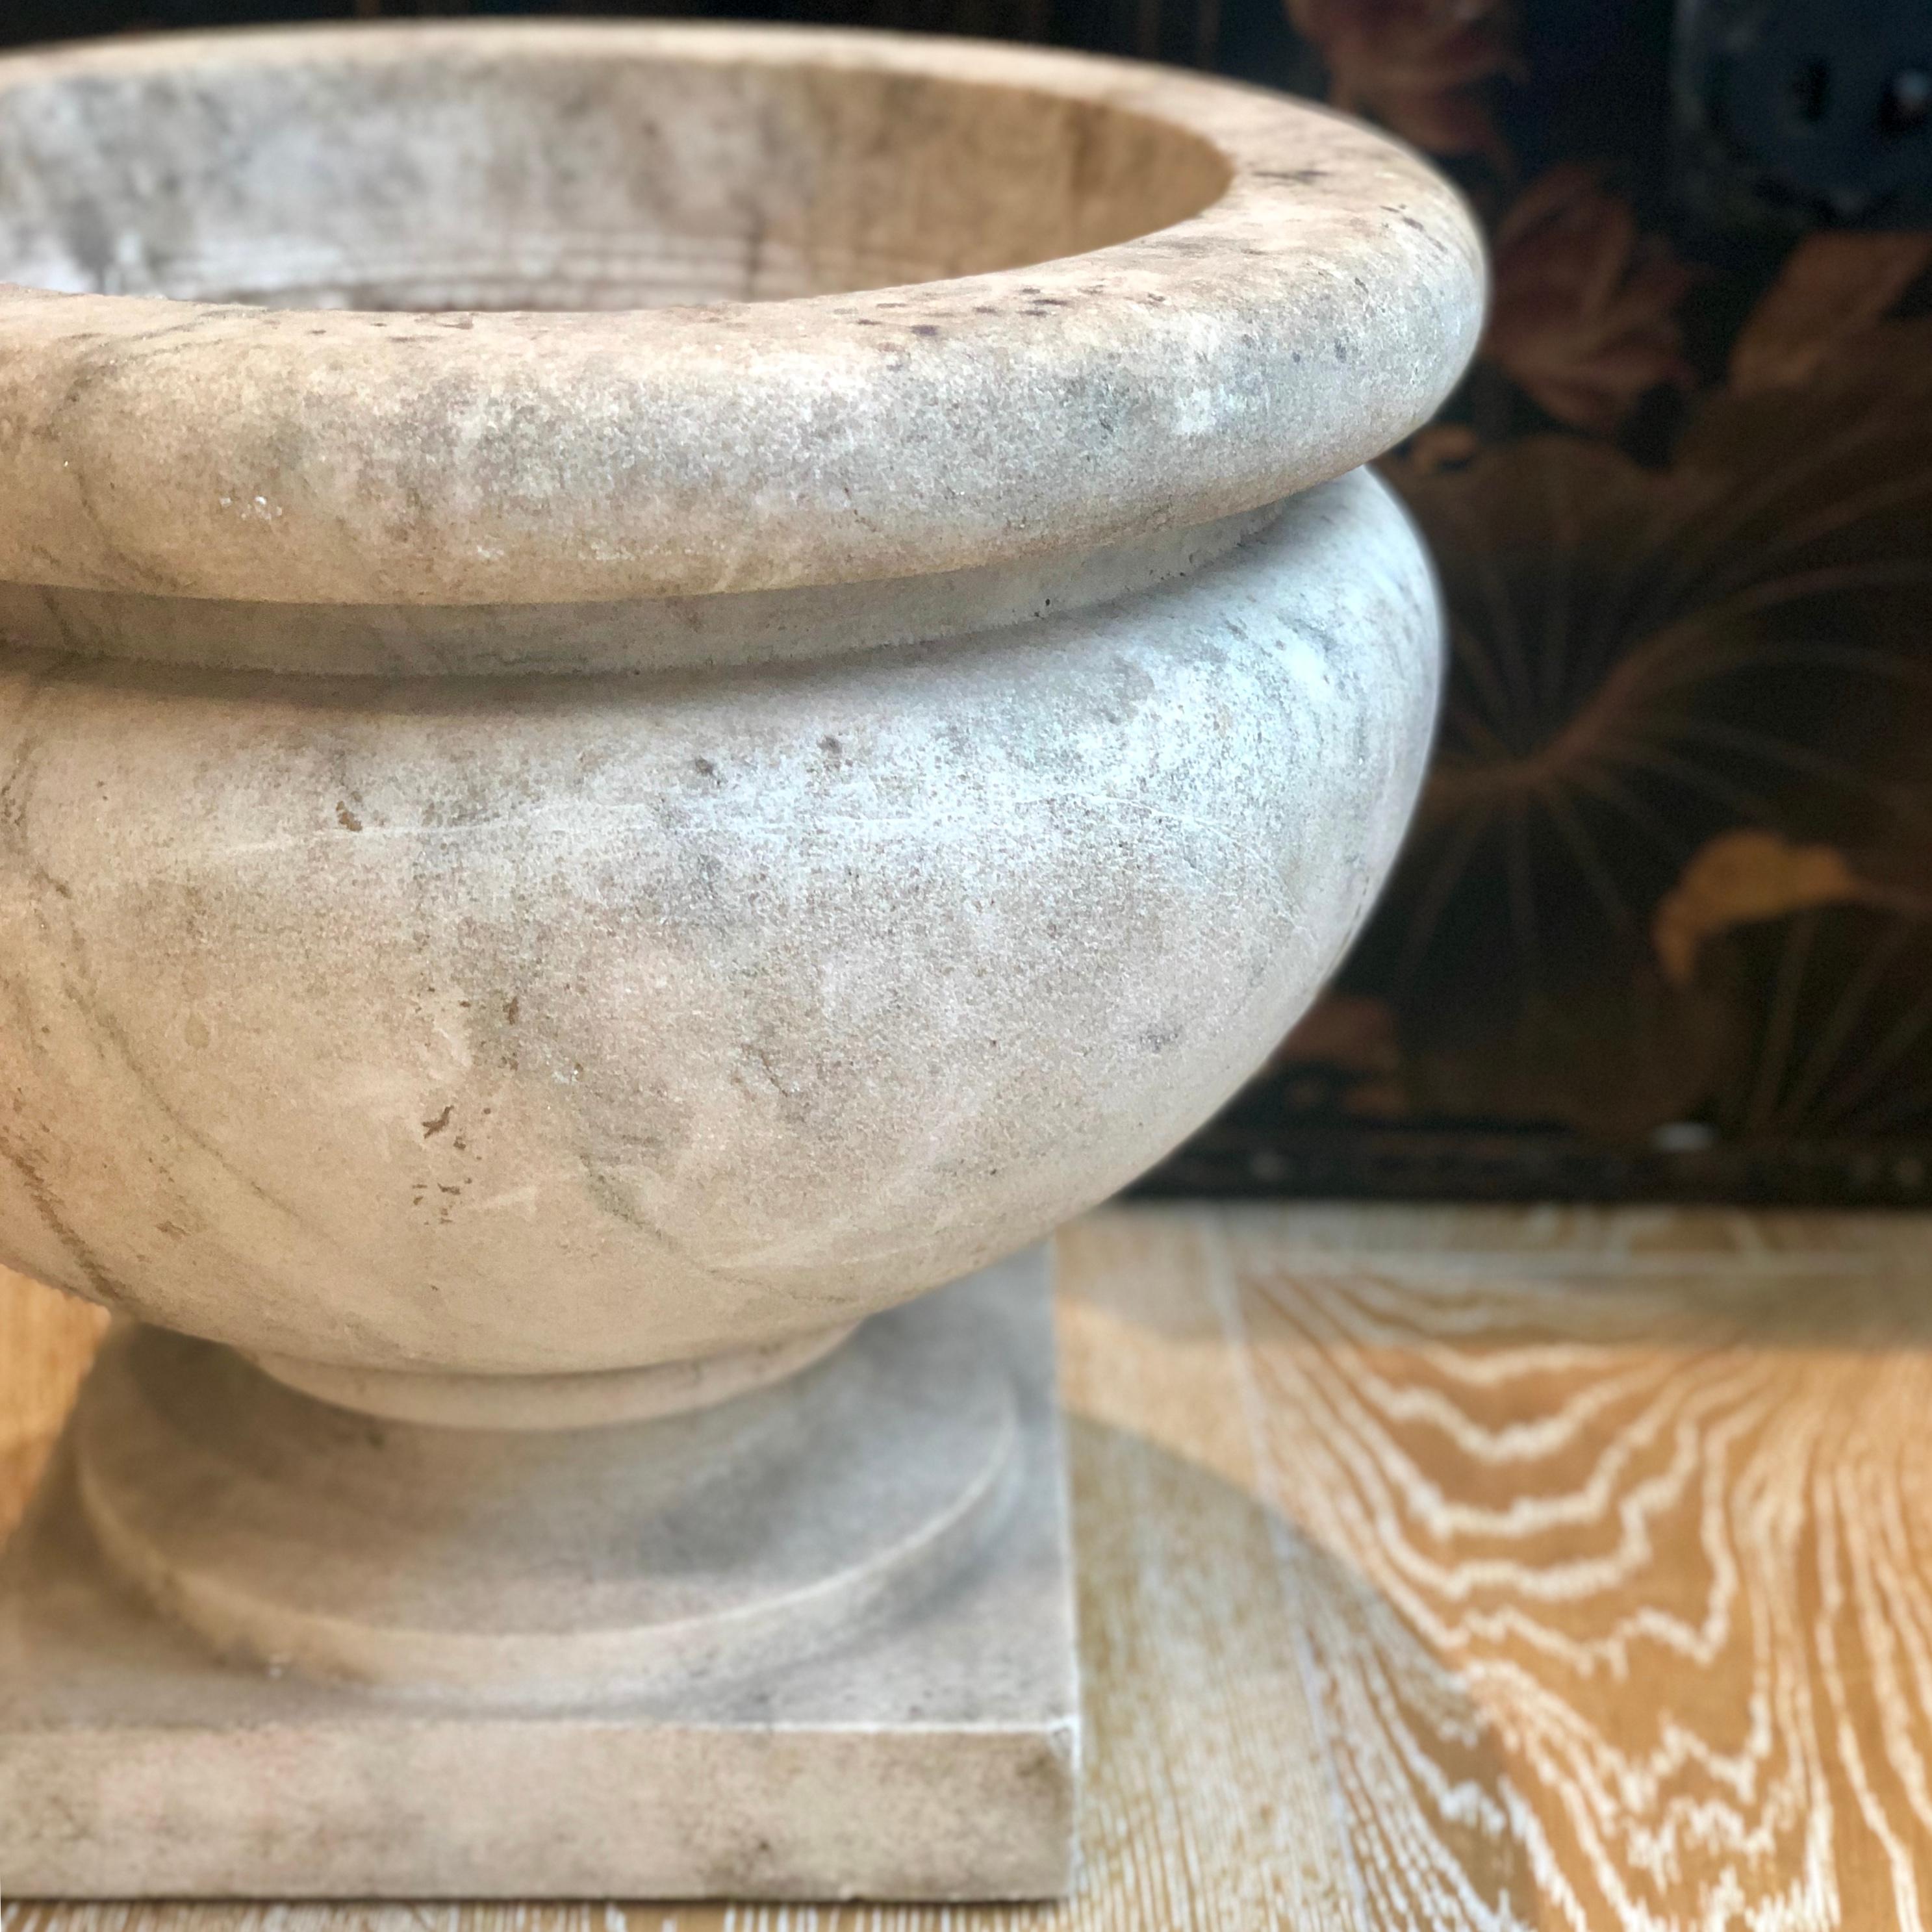 Grey marble round planter pot from the mid-1800s on a stand.
Good antique condition considering the age.